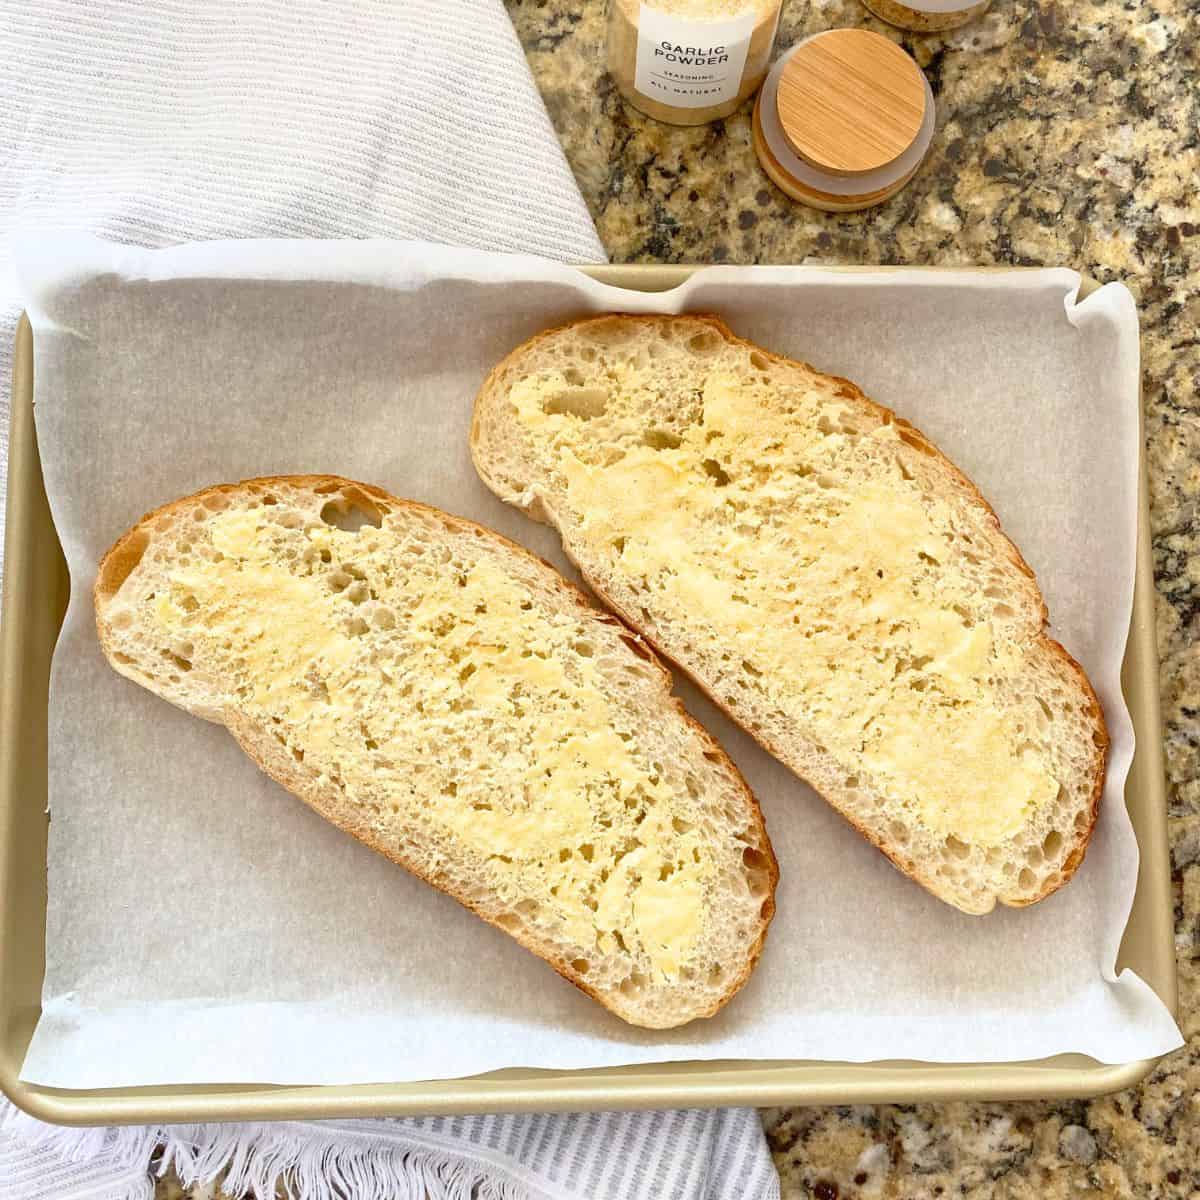 Buttered sourdough bread on a gold baking sheet pan, waiting to be roasted in the oven